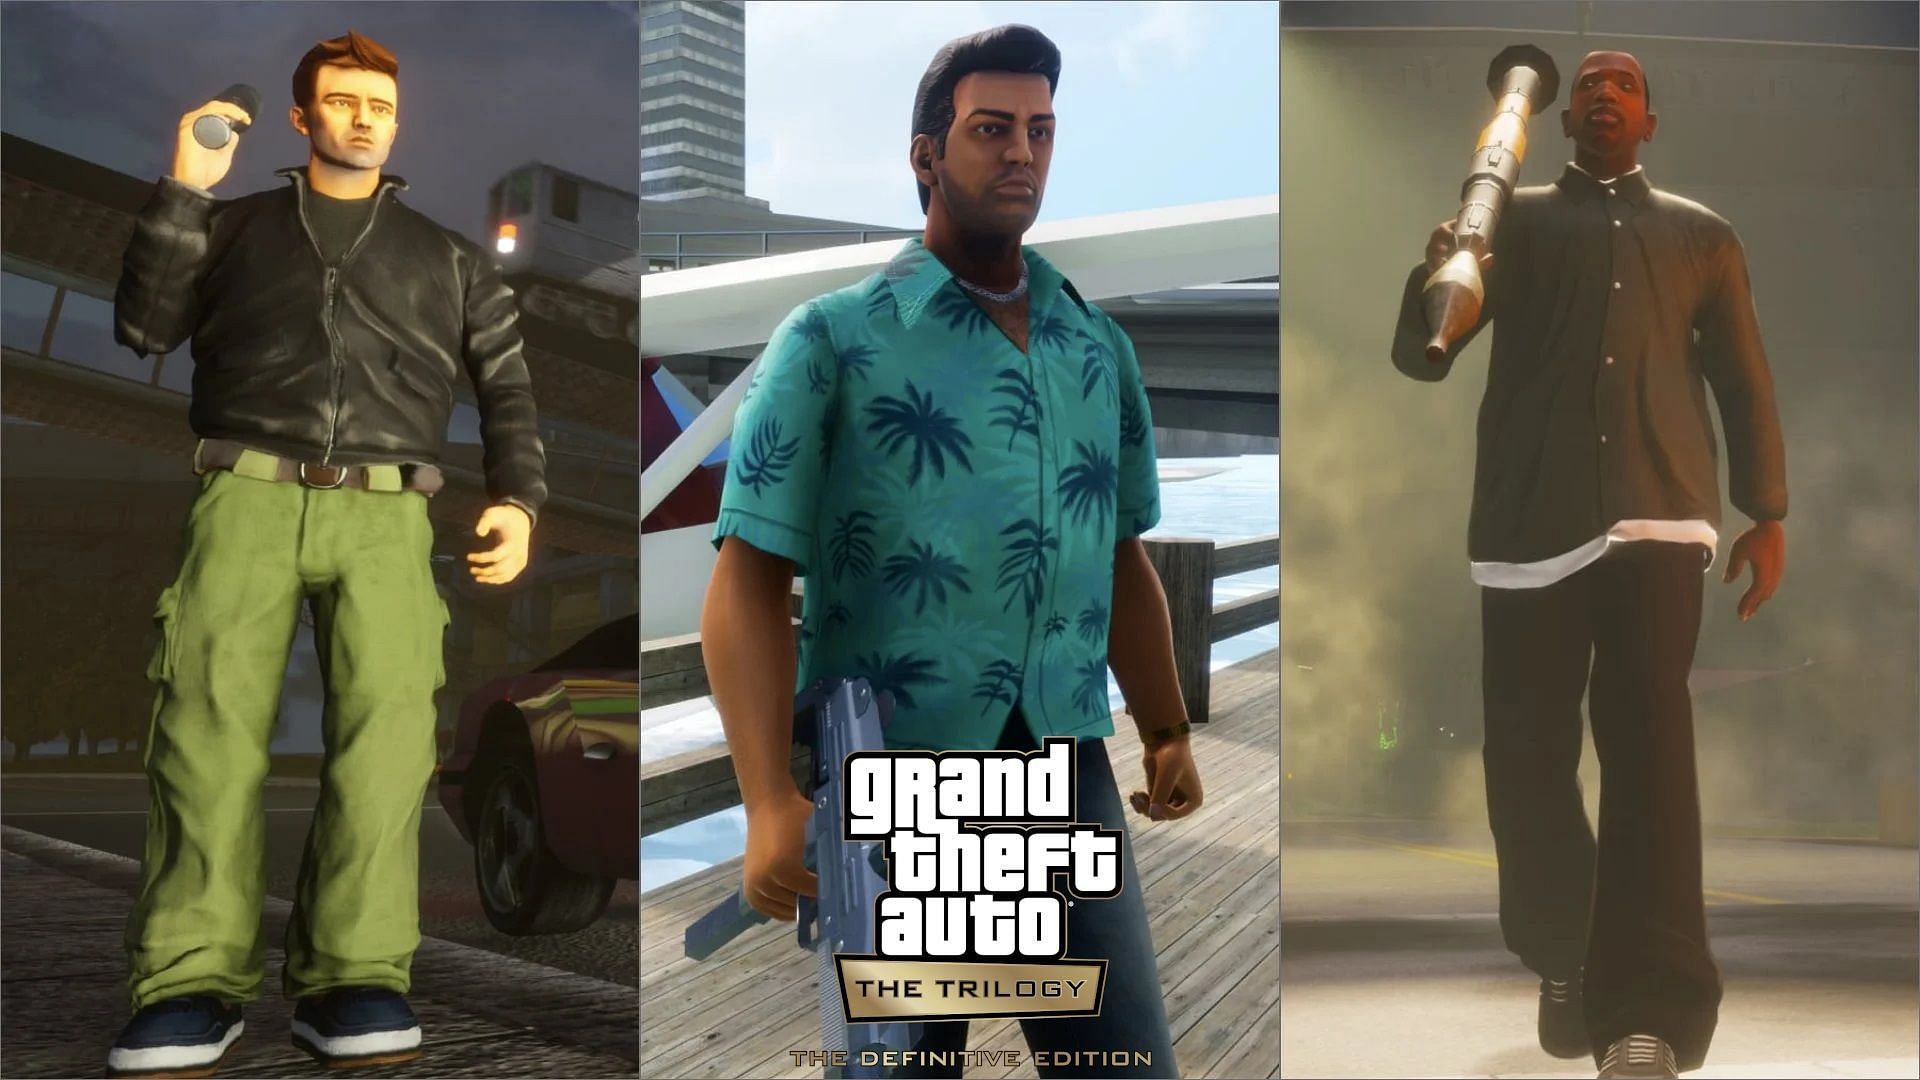 The GTA Trilogy: Definitive Edition had a rocky reception by fans (image via Rockstar Games)